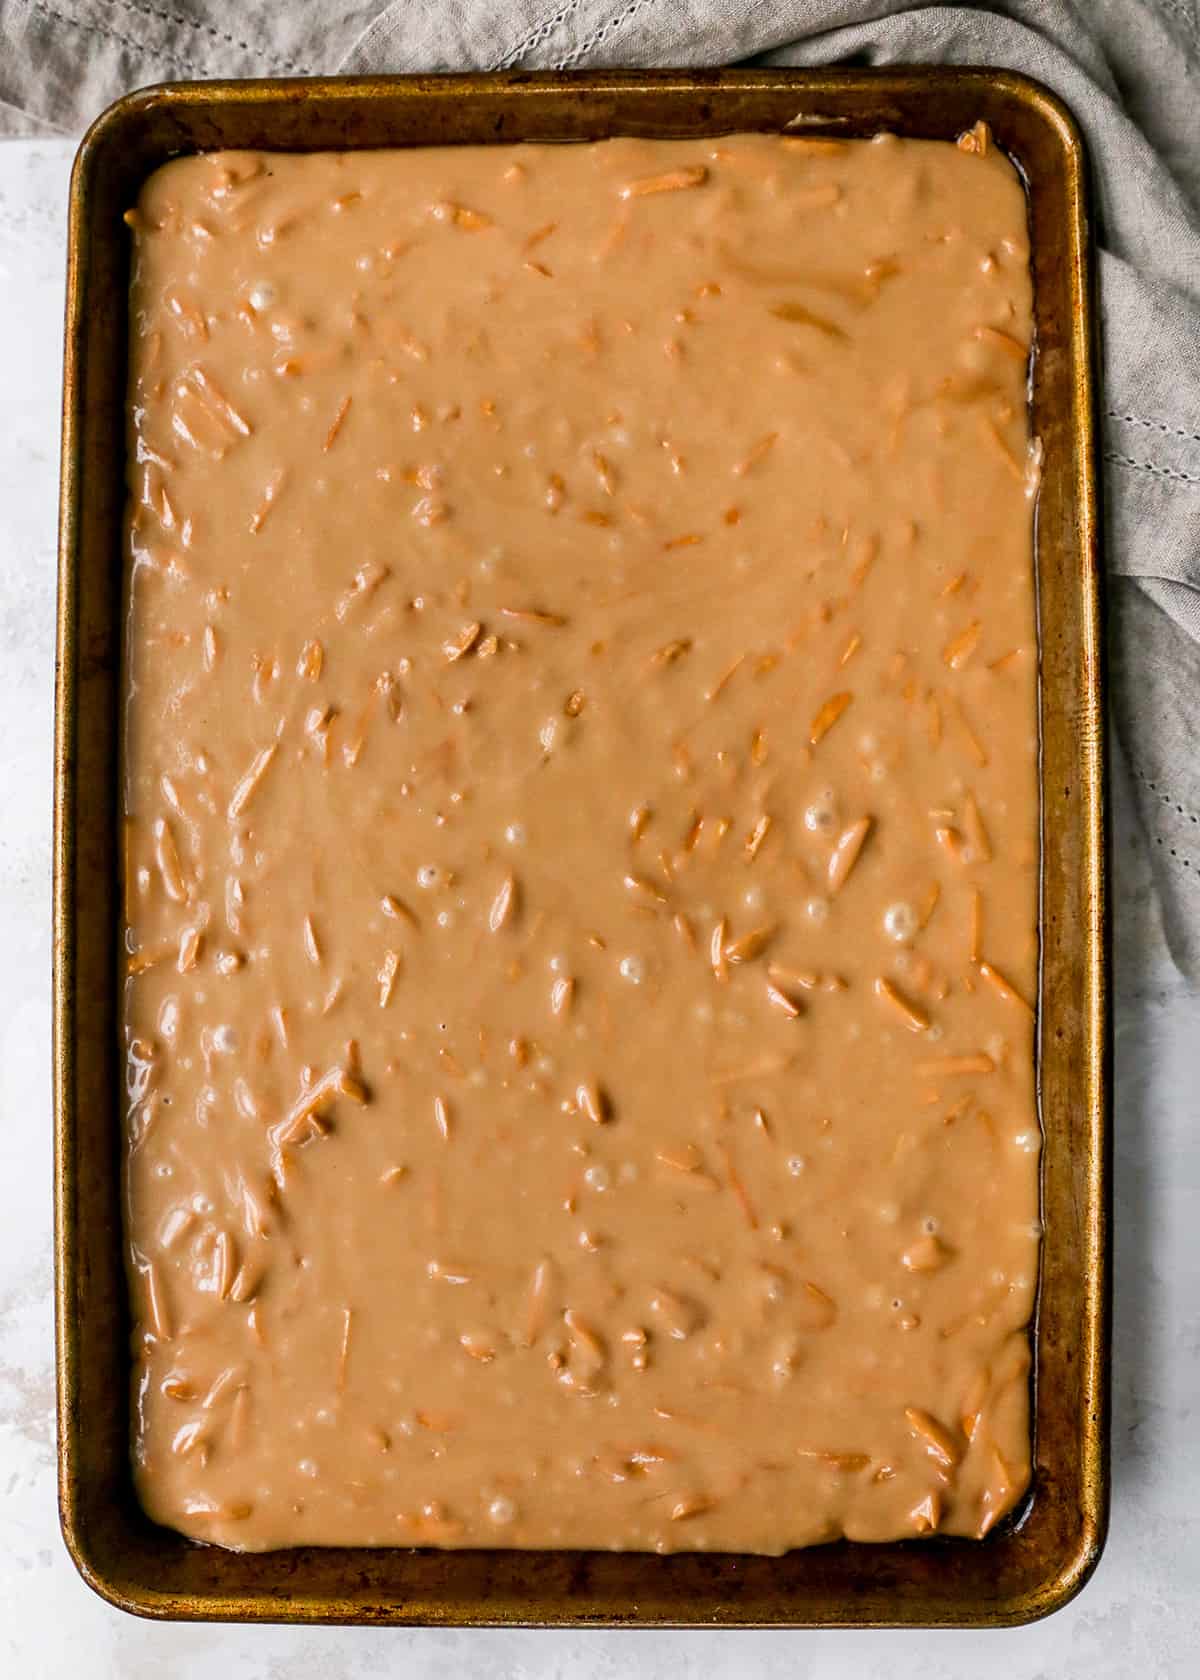 Almond Toffee spread out on a baking sheet